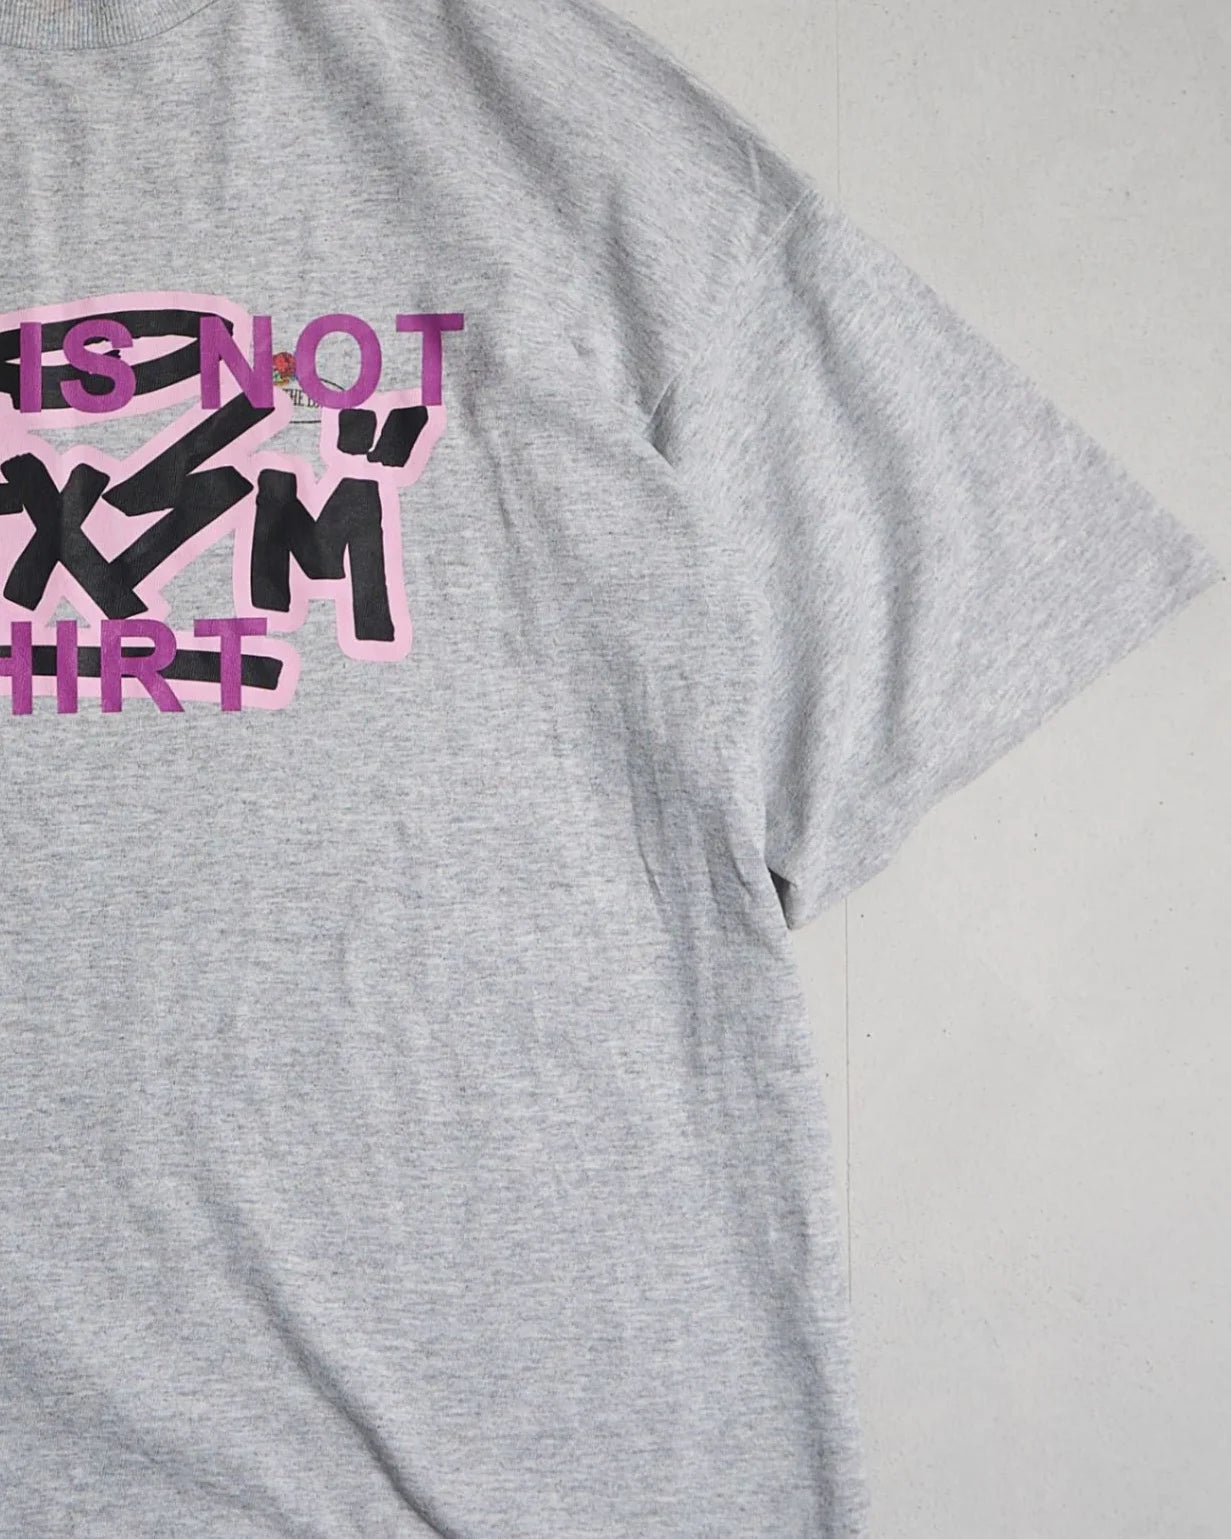 Vintage Staxism Single Stitch T-Shirt Right